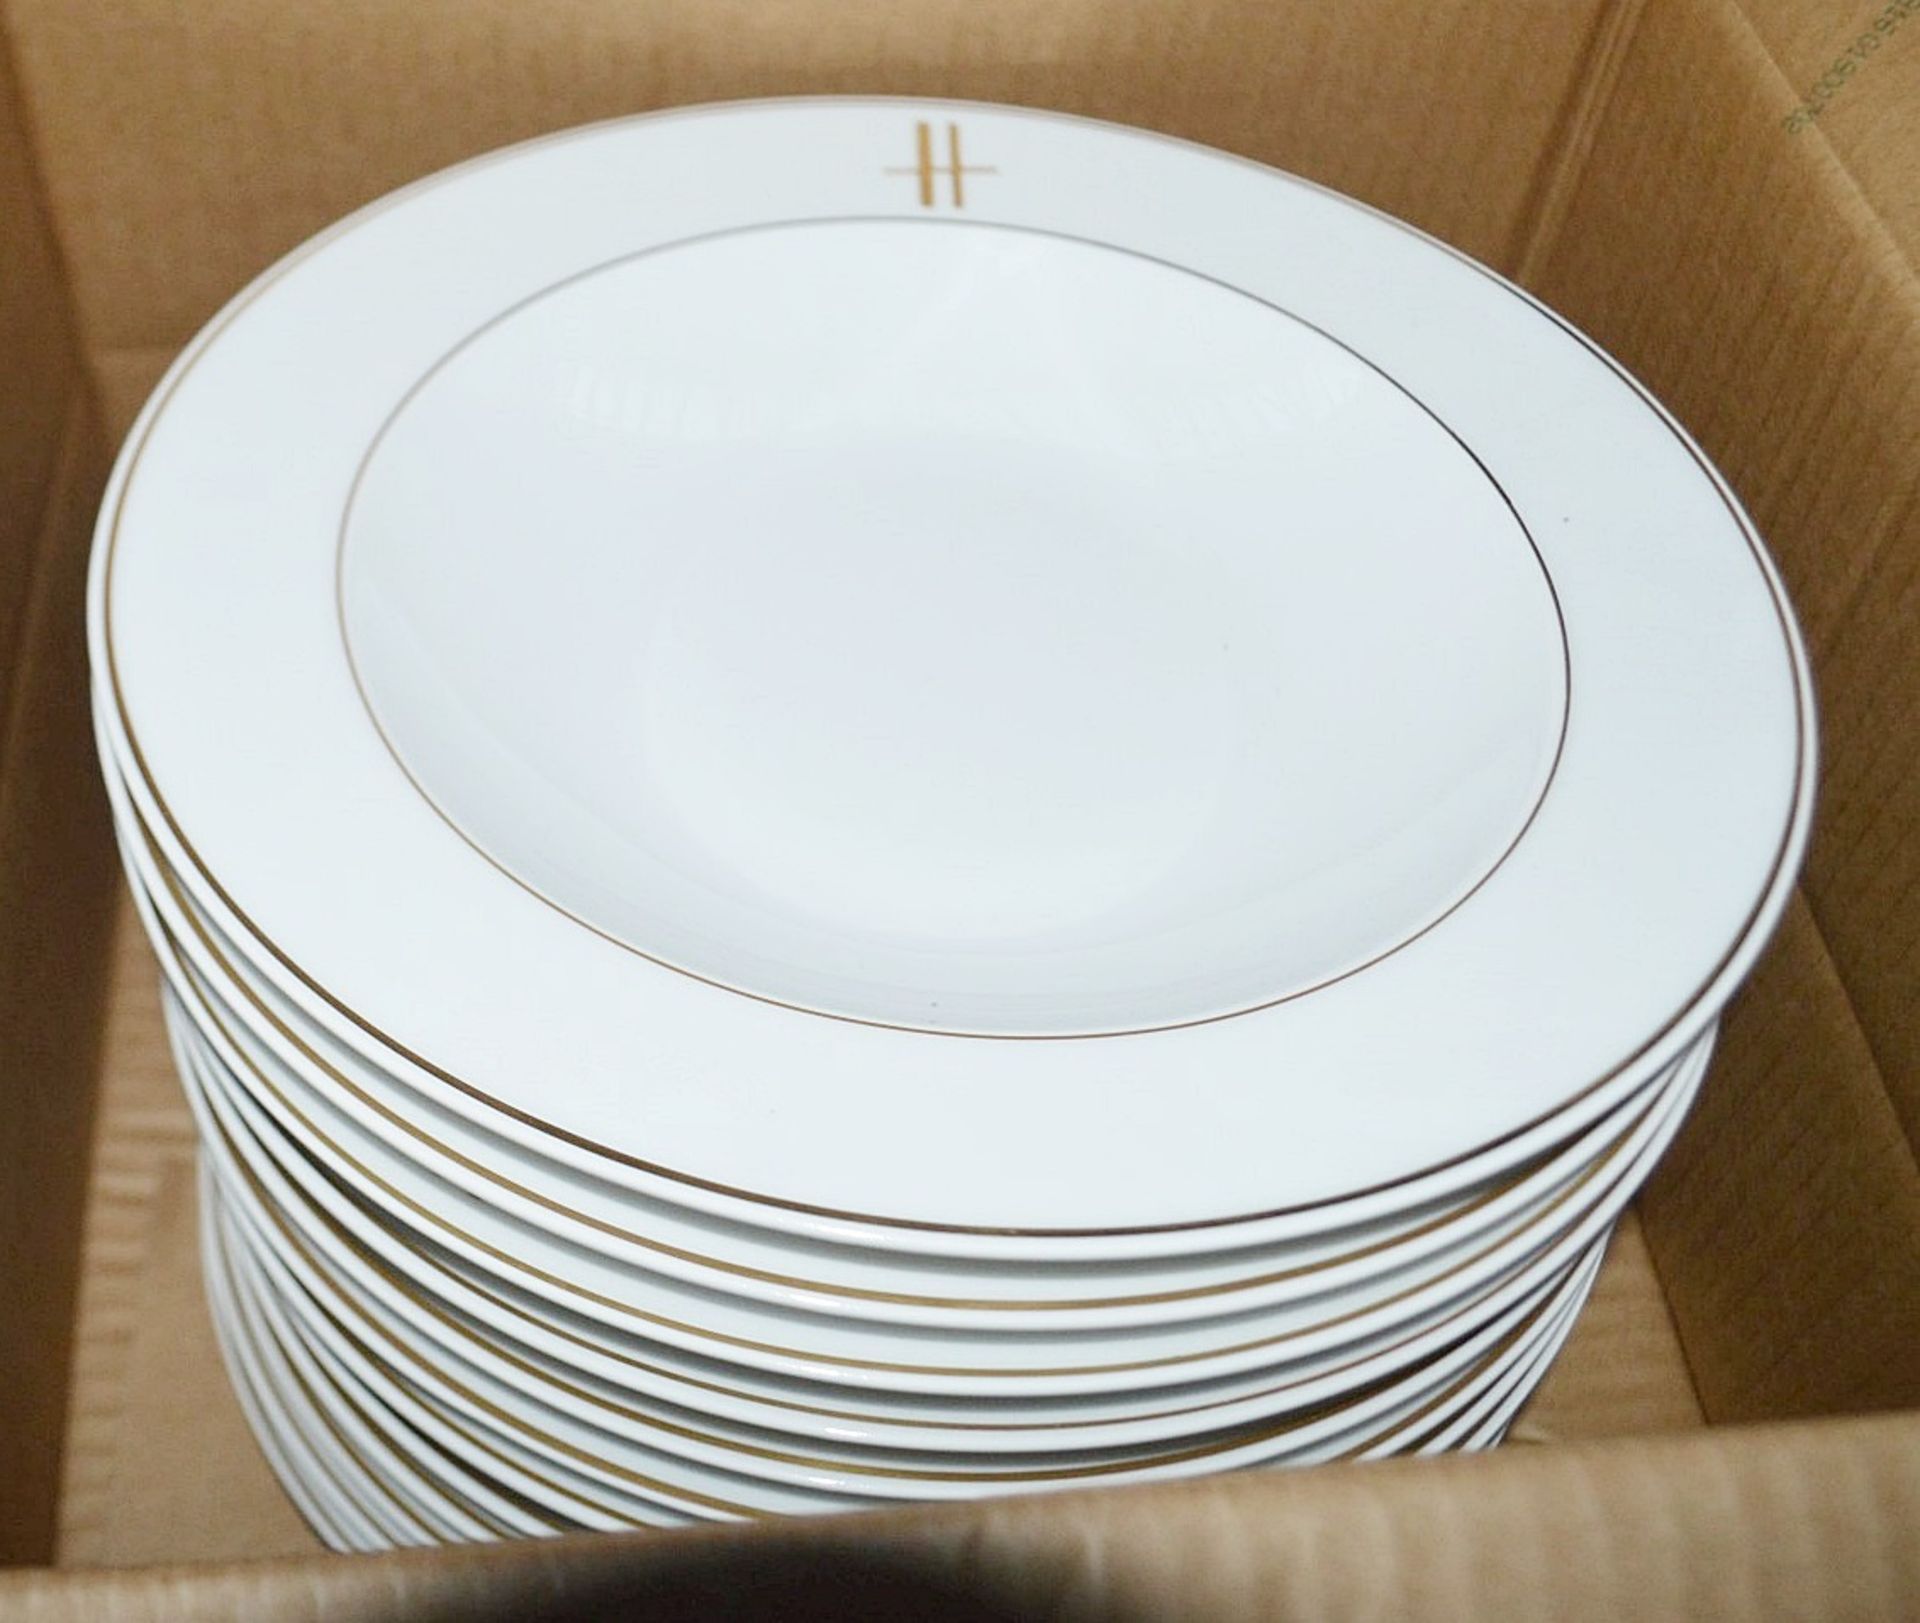 12 x PILLIVUYT Porcelain Pasta / Soup Plates In White Featuring 'Famous Branding' In Gold - Image 4 of 5